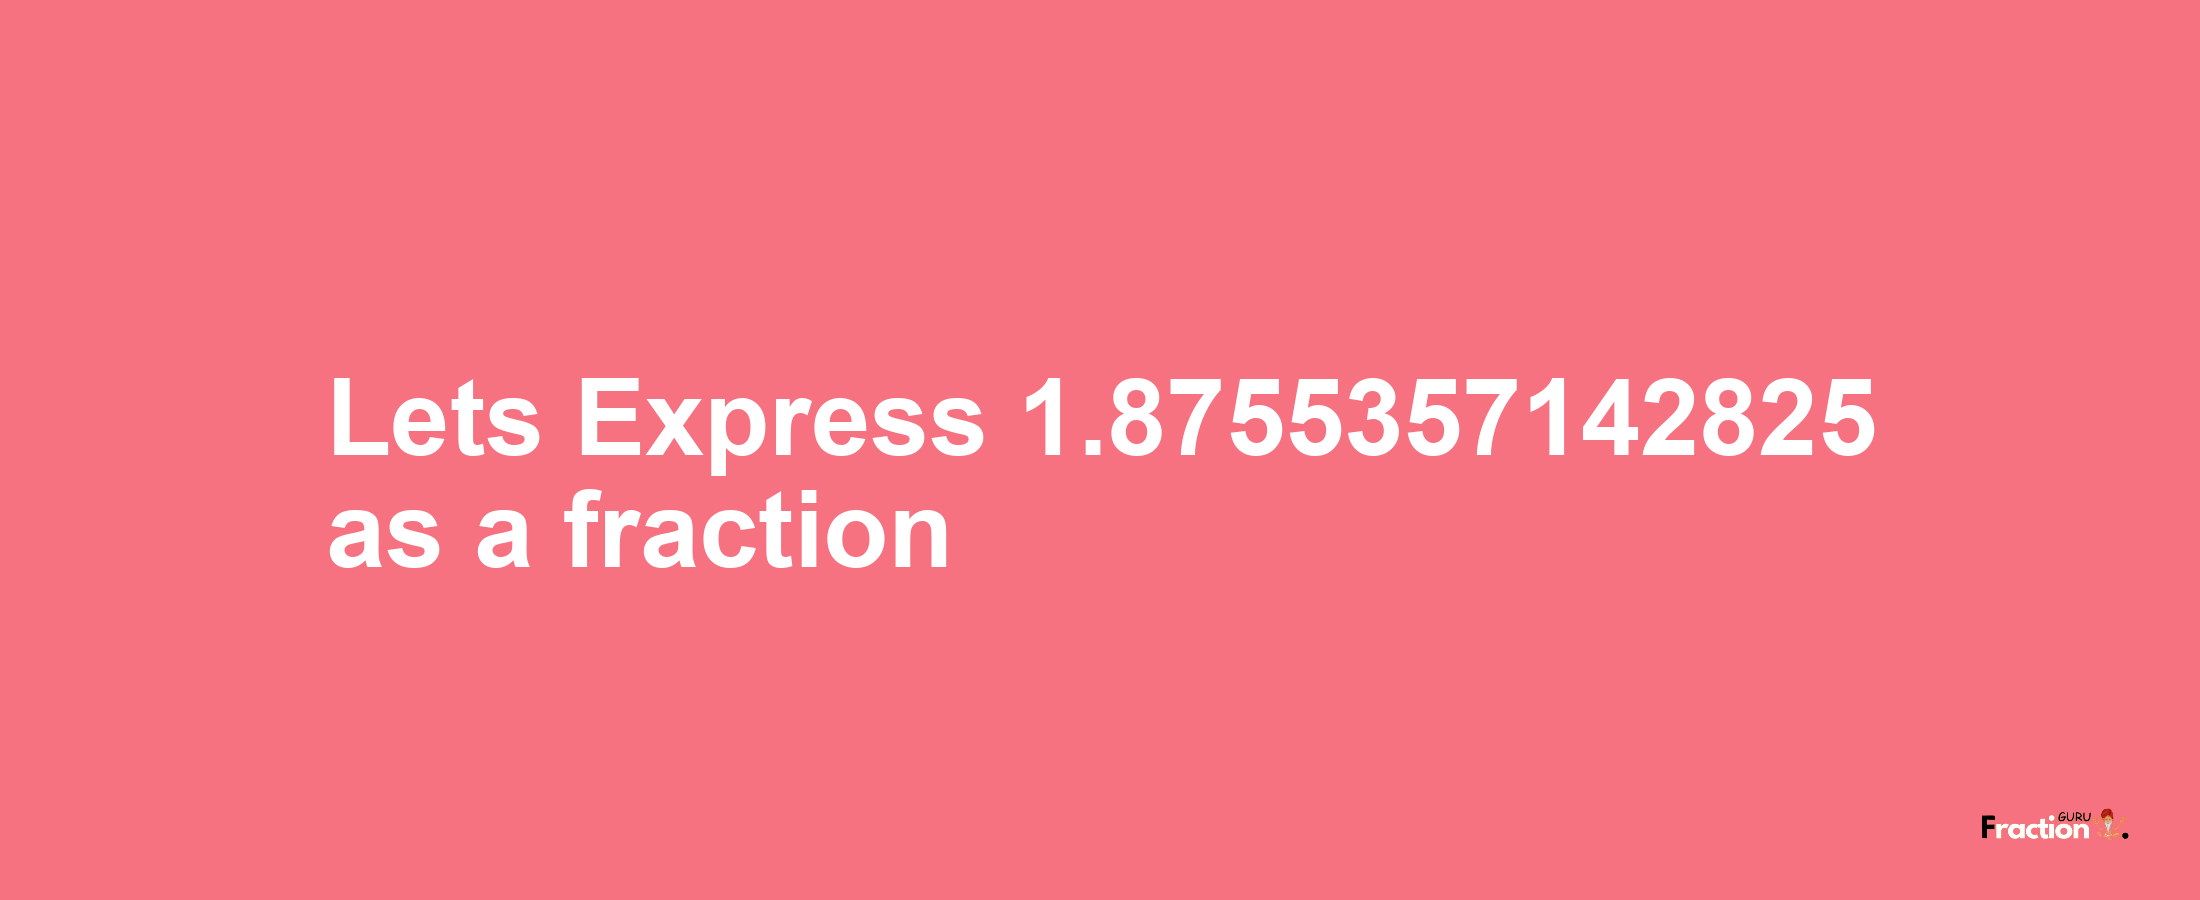 Lets Express 1.8755357142825 as afraction